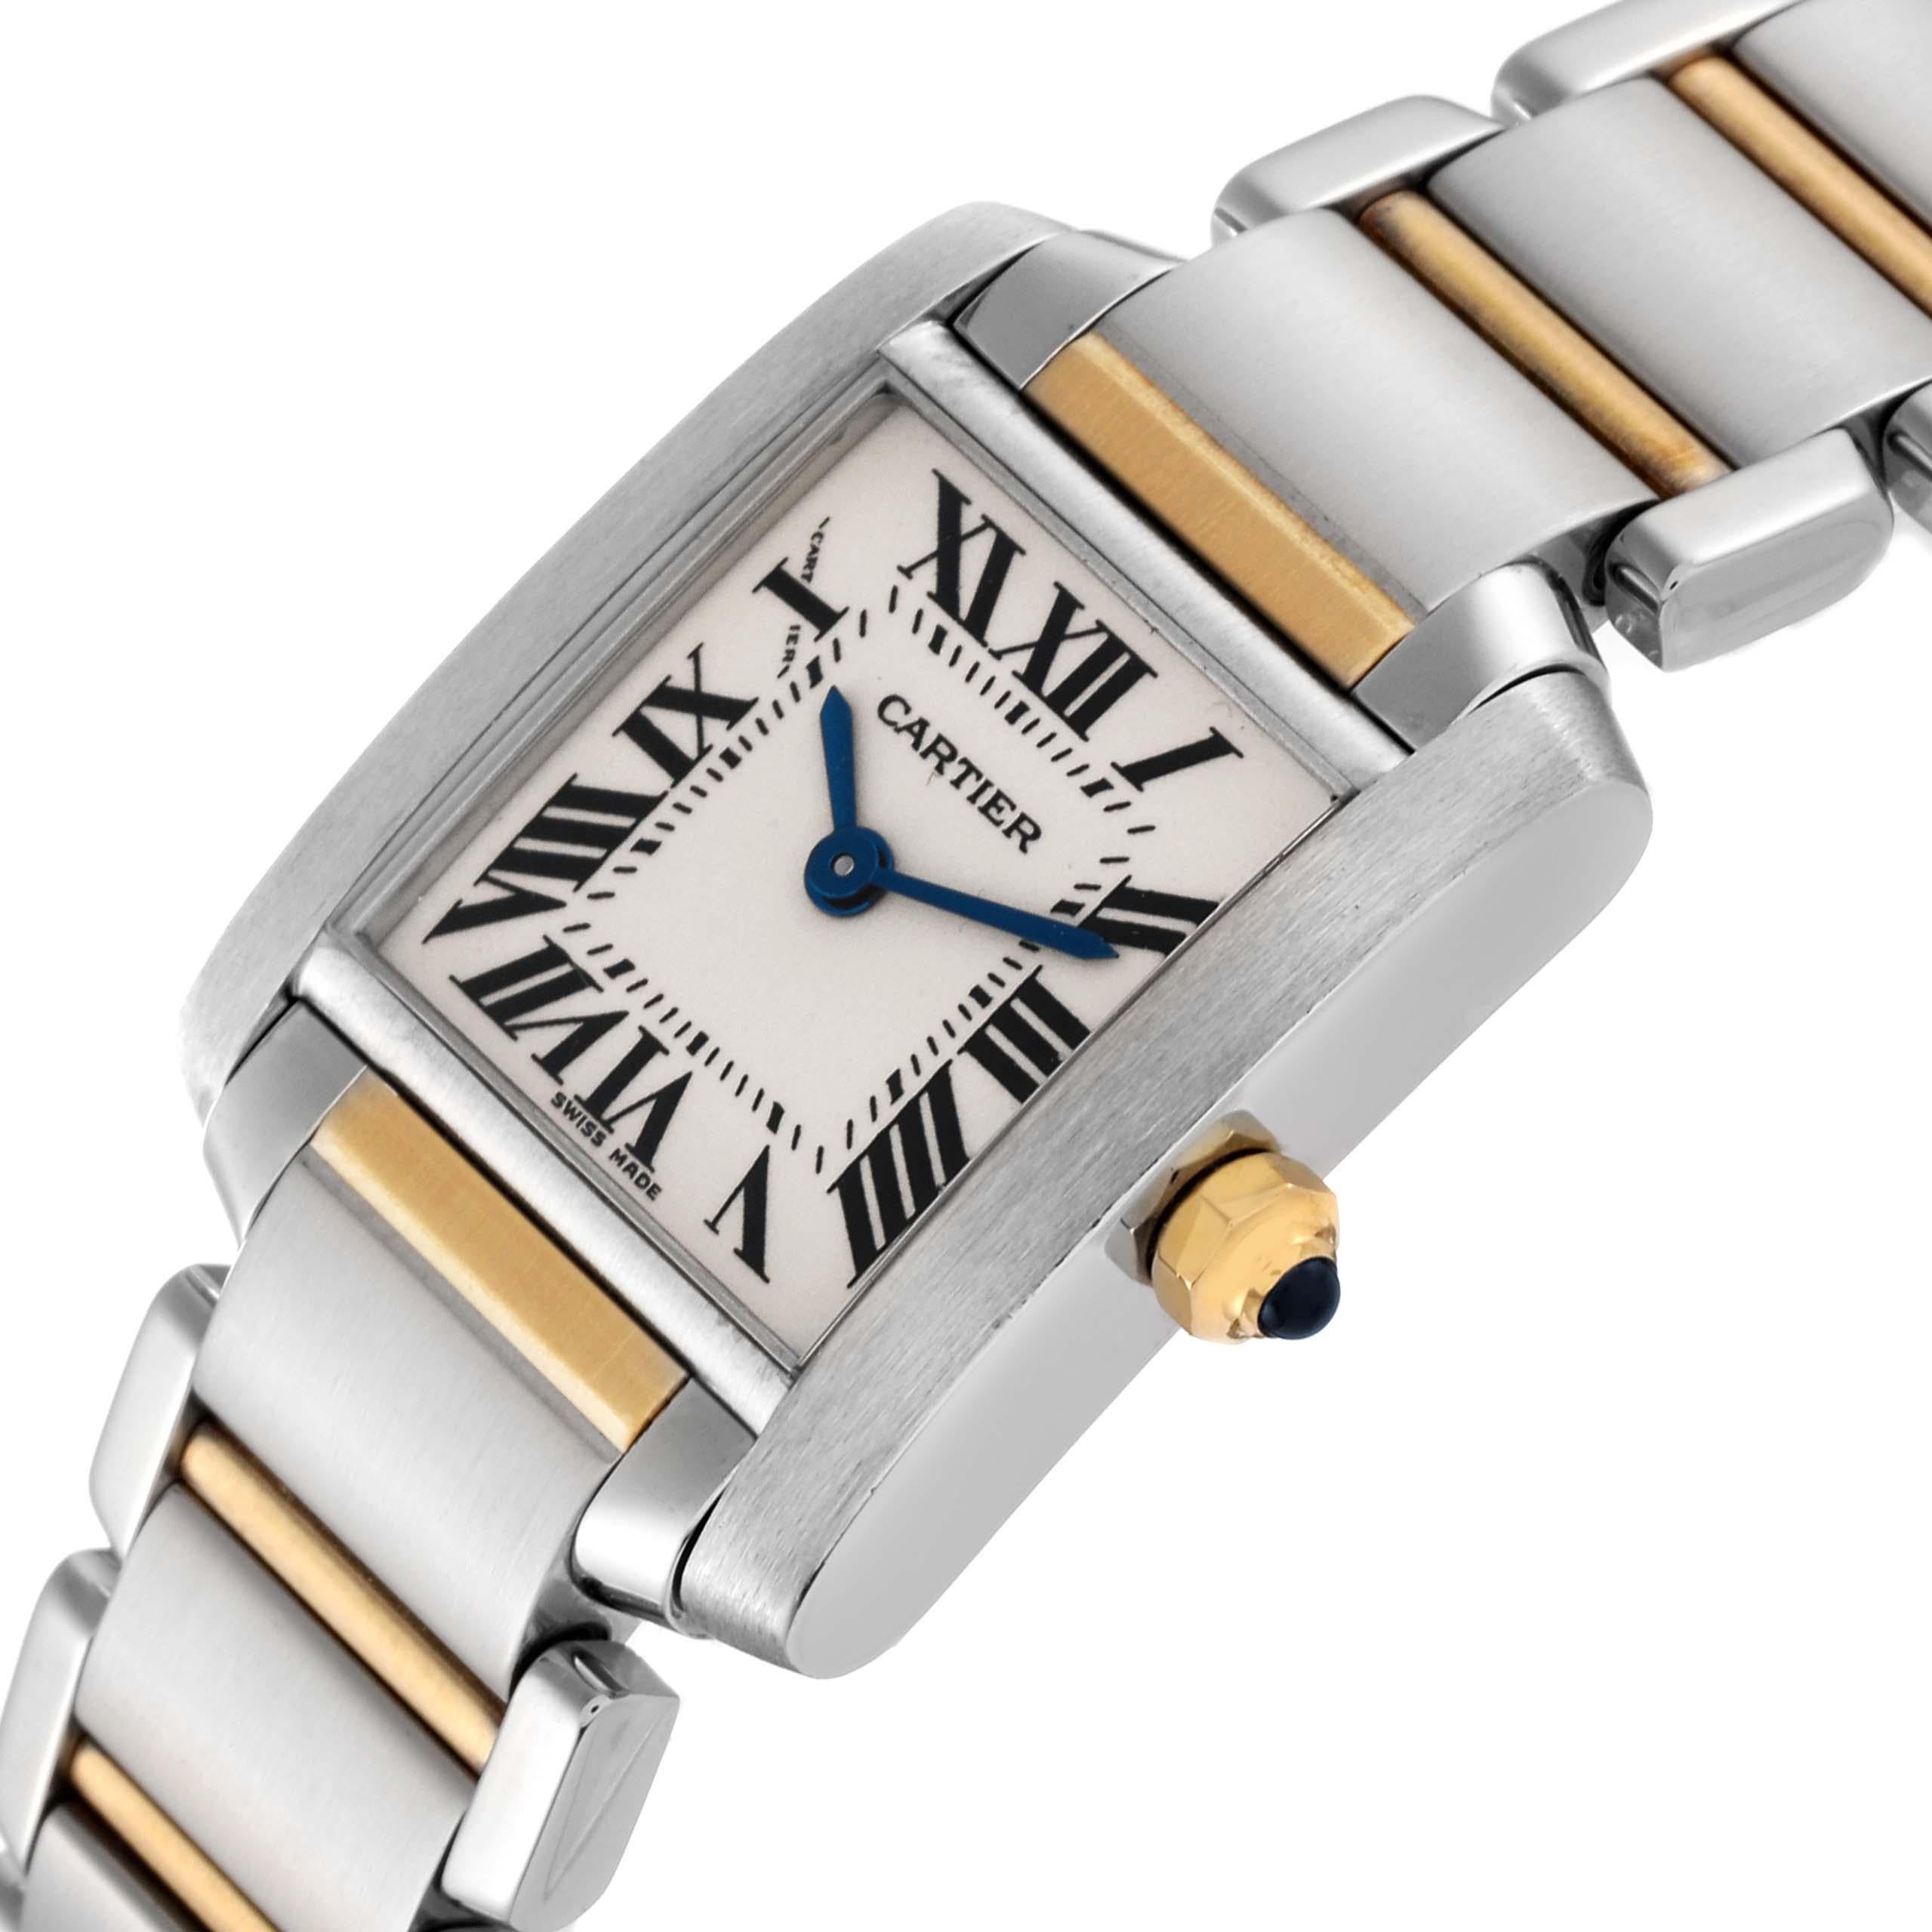 Cartier Tank Francaise Small Steel Yellow Gold Ladies Watch W51007Q4 1